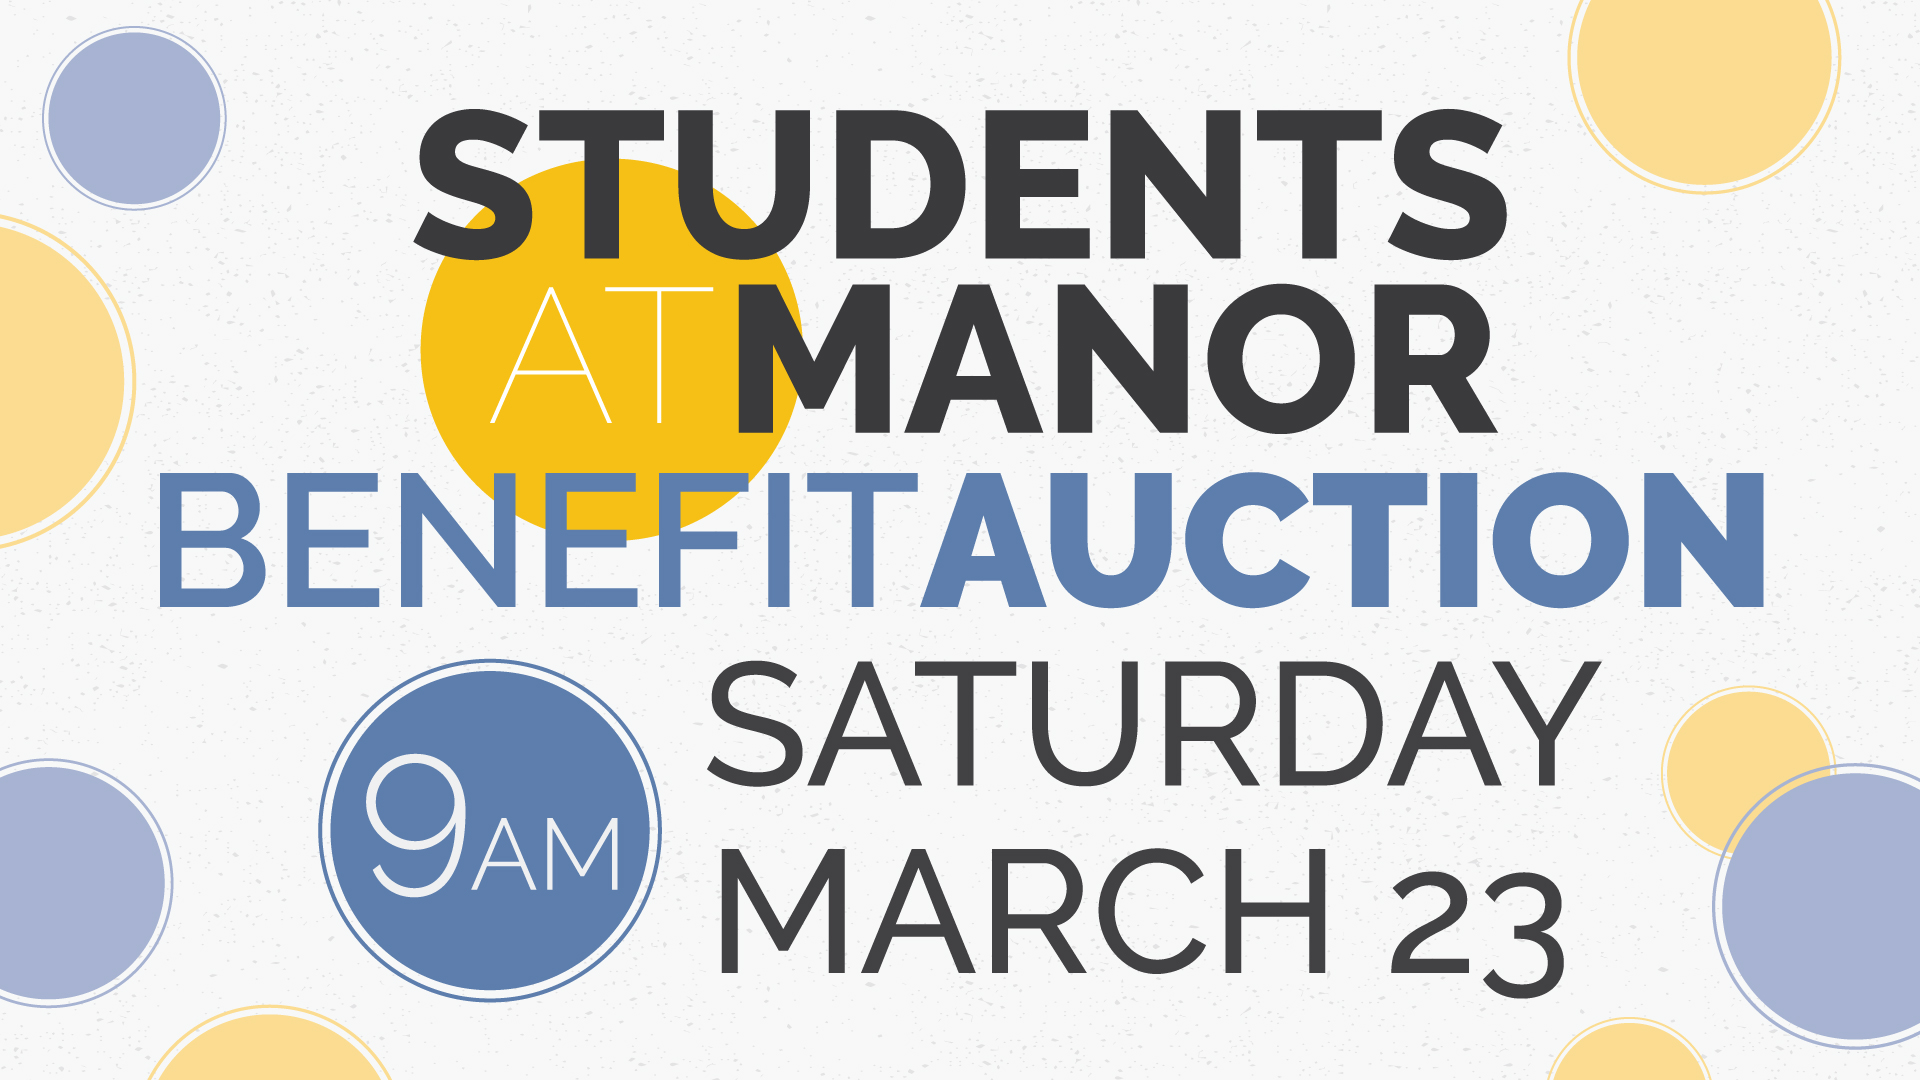 Students at Manor Benefit Auction | Saturday, March 23 at 9am